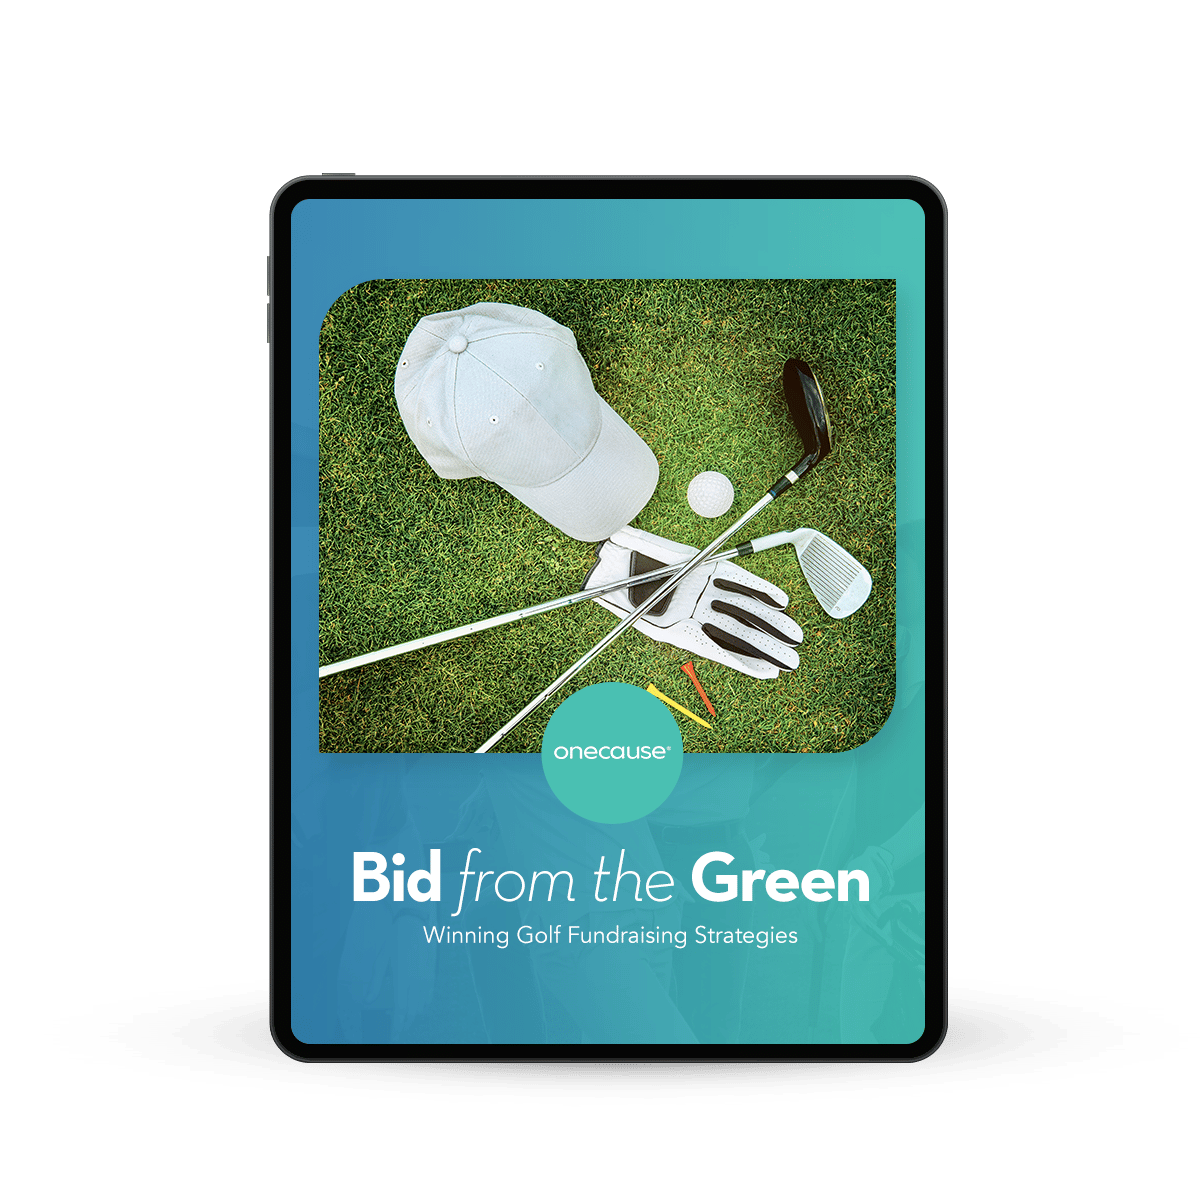 Bid from the Green